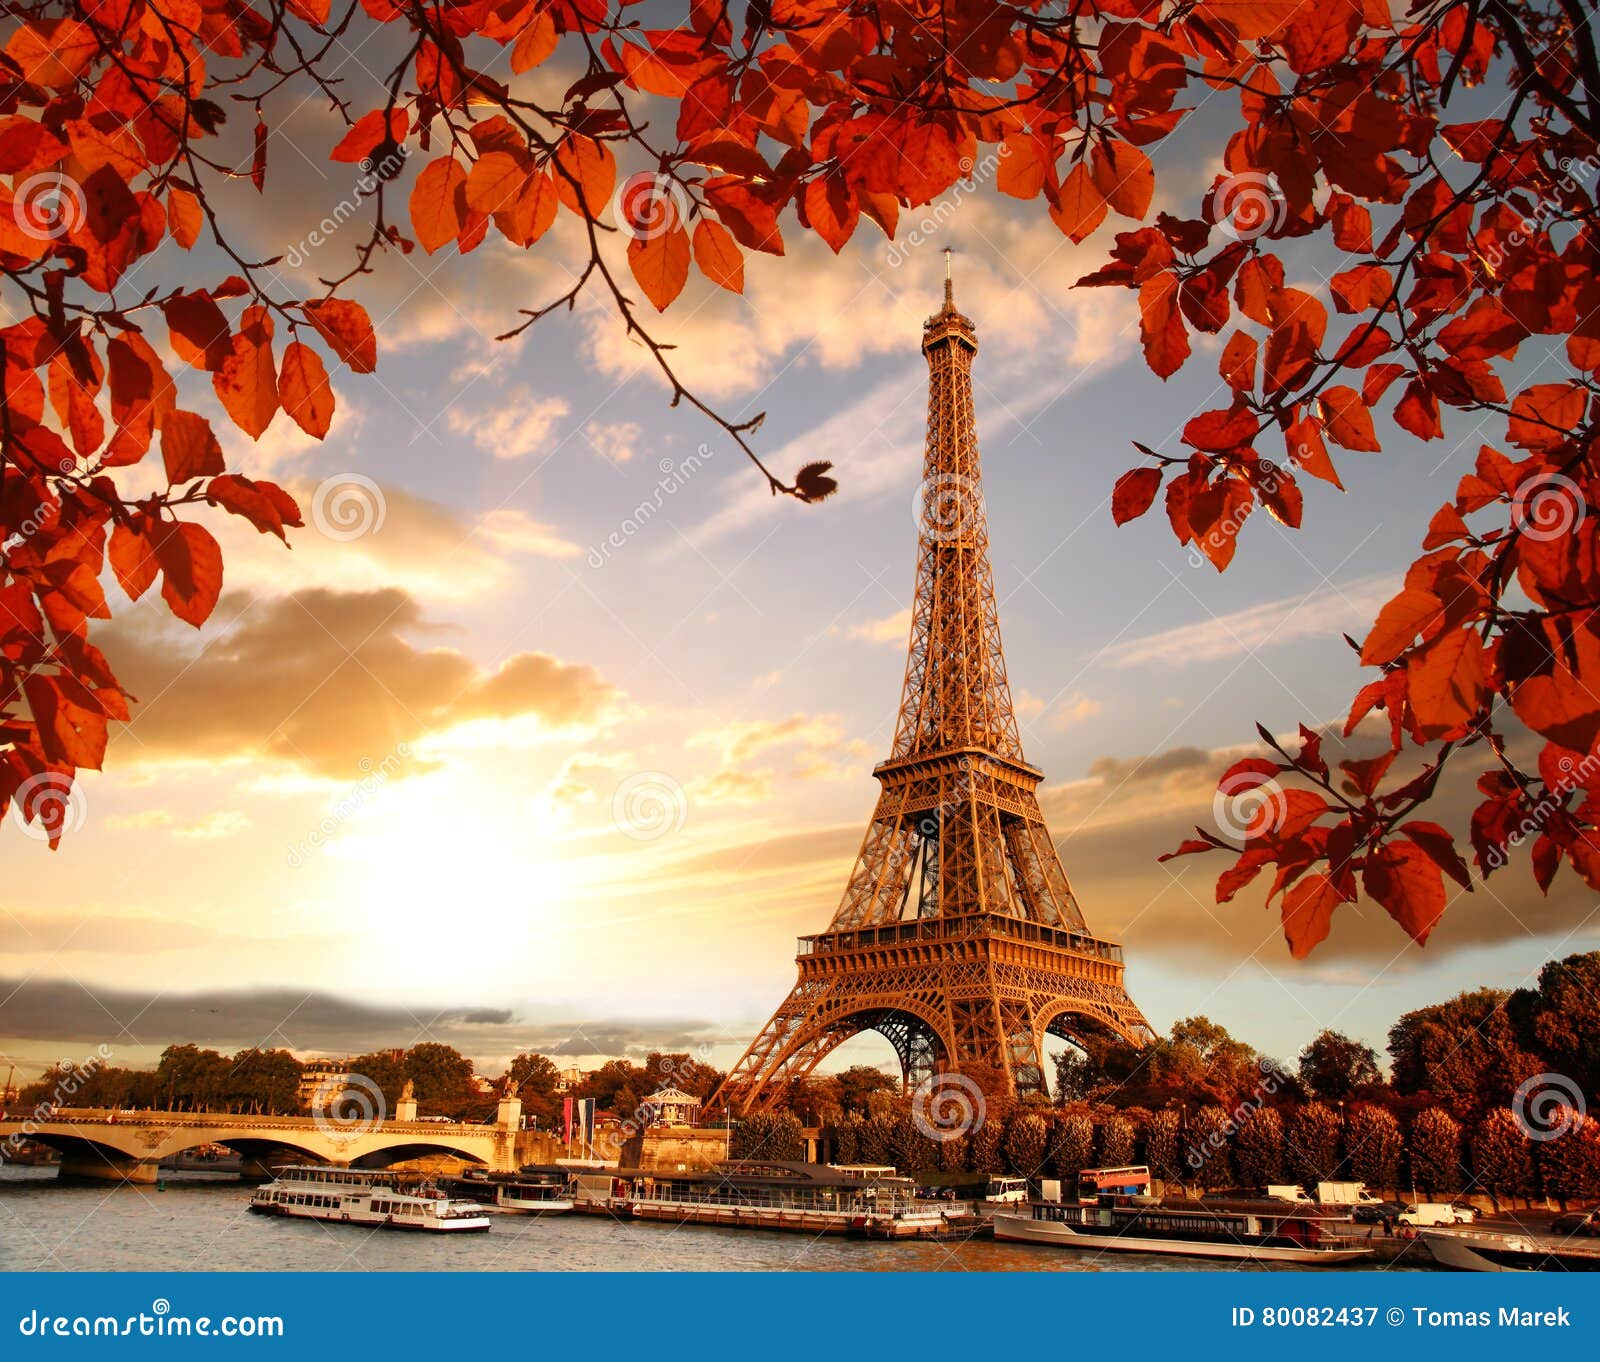 eiffel tower with autumn leaves in paris, france